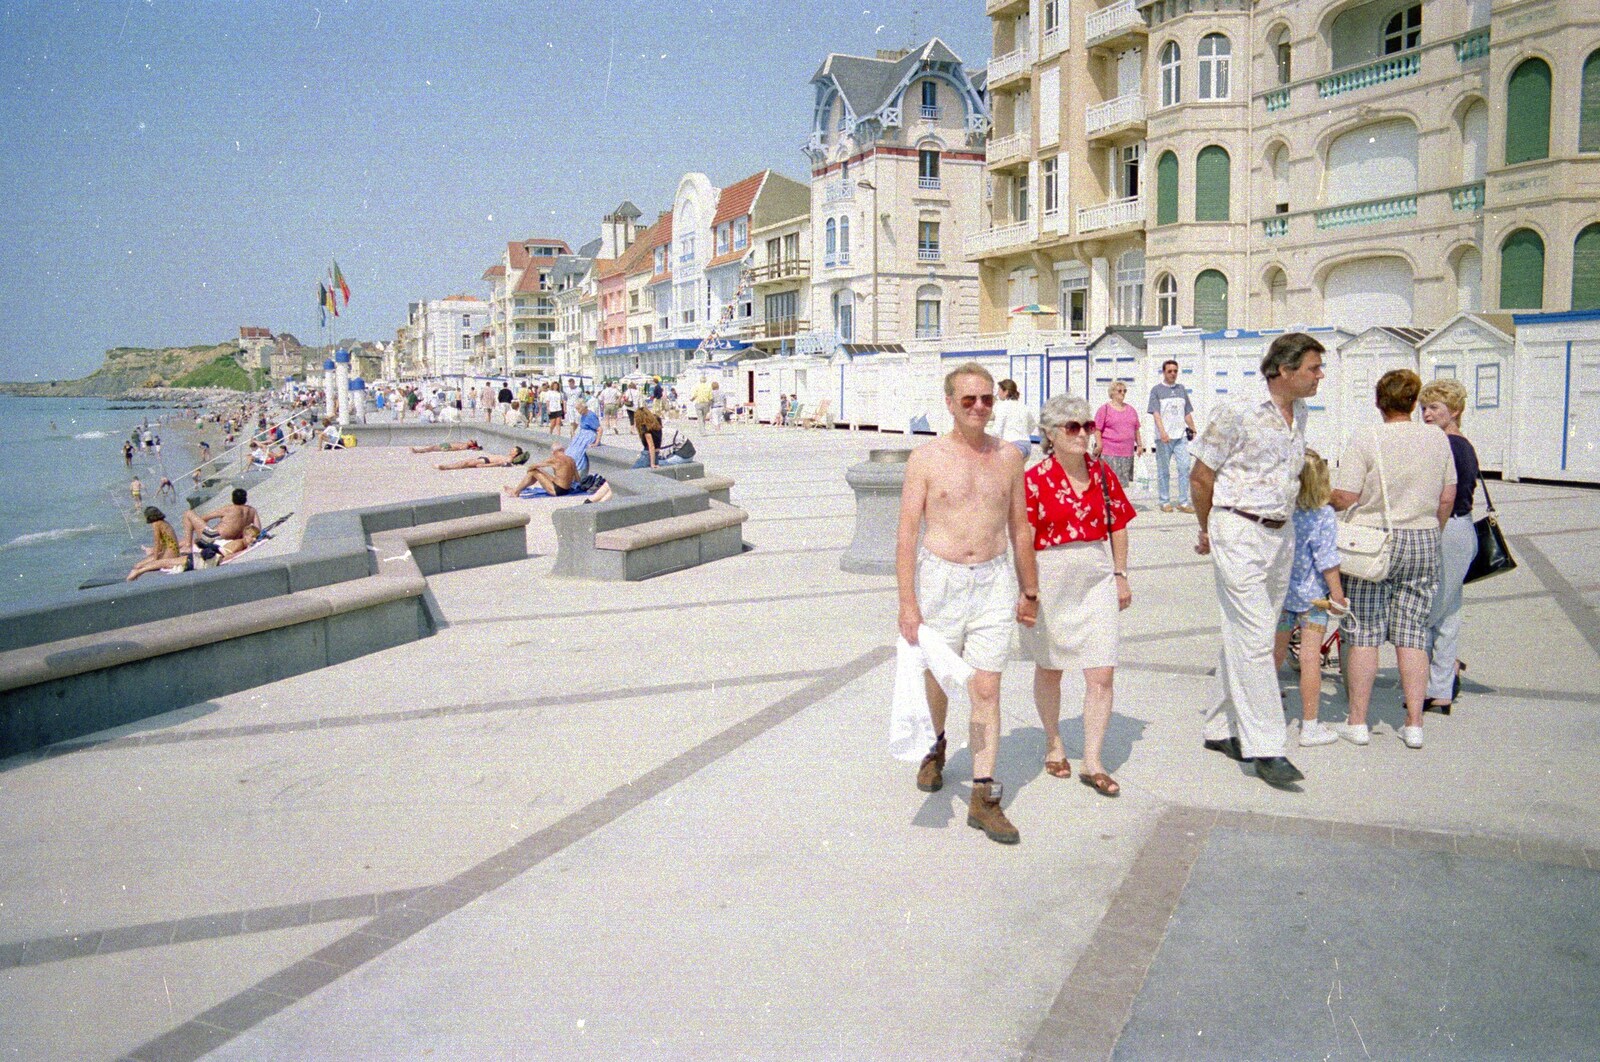 John Willy, Spammy and Alan at Wimmereaux from A Brome Swan Trip to Wimereux, France - 20th June 1996